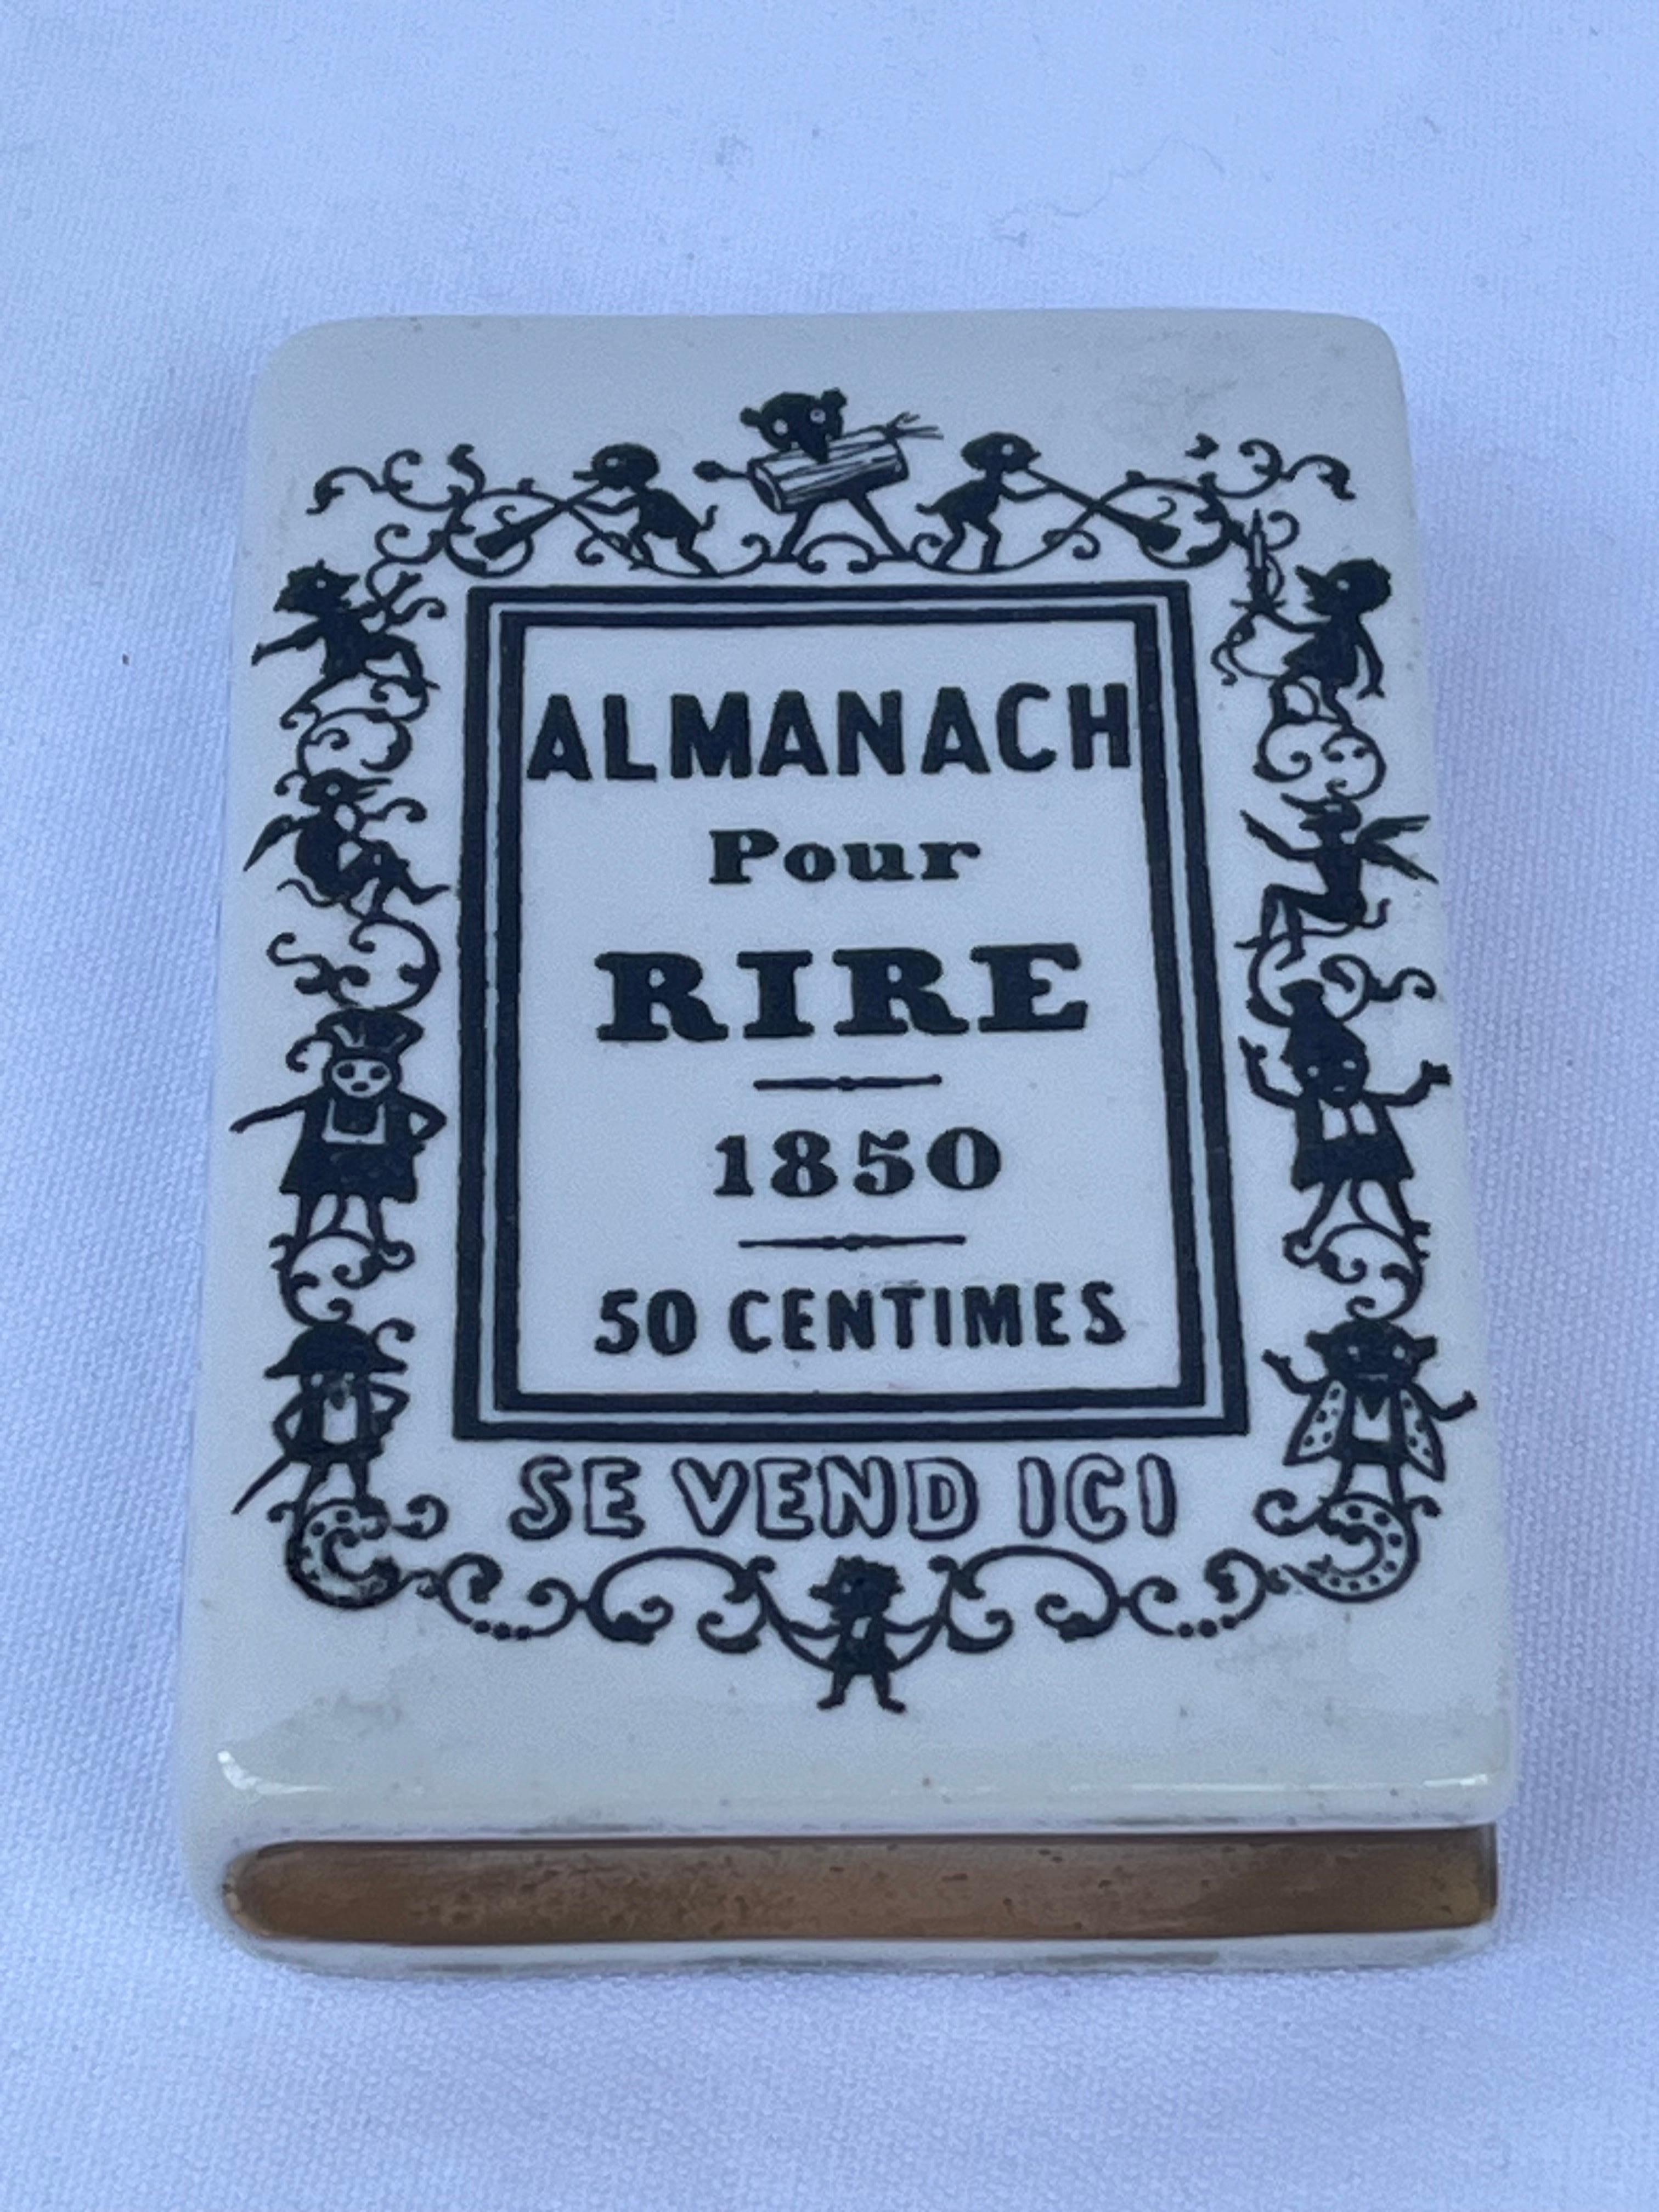 A perfect little faux book. The Almanach Pour Rire. By none other than Piero Fornasetti. This vintage desk accessory or paperweight is the ultimate addition to your interior. And hey, it's just for laughs. I really needn't say much more about this